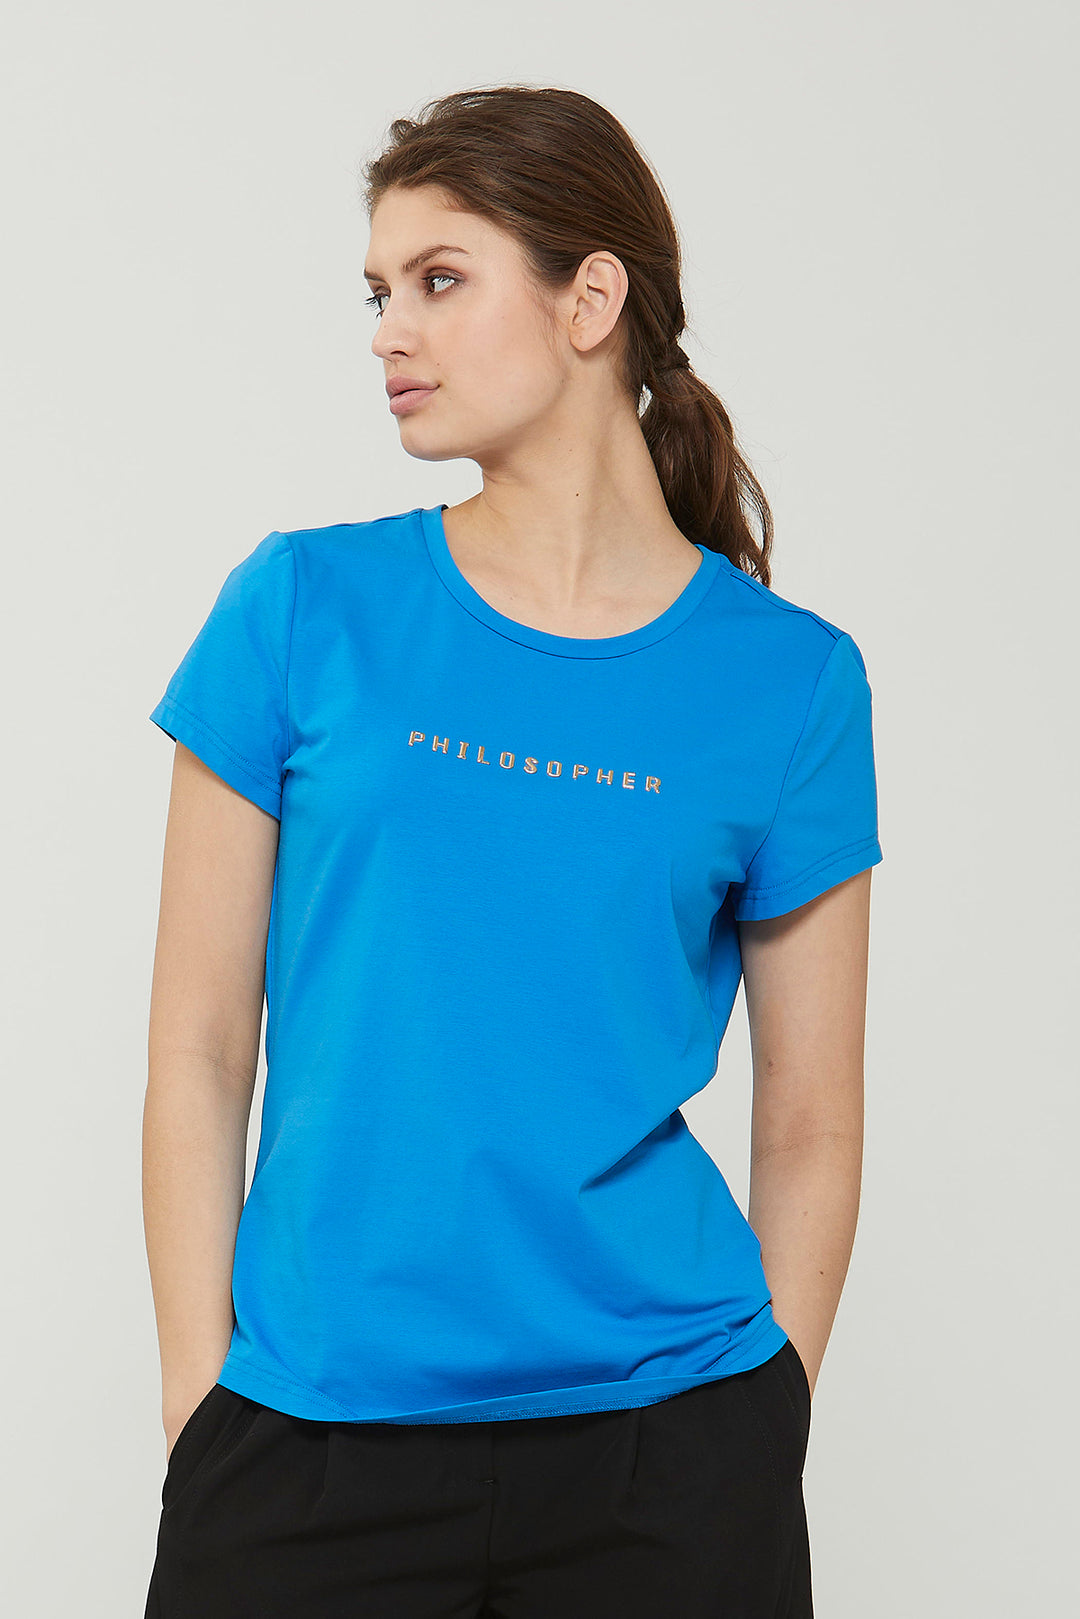 PBO Philosopher T-shirt T-SHIRTS 236 French blue